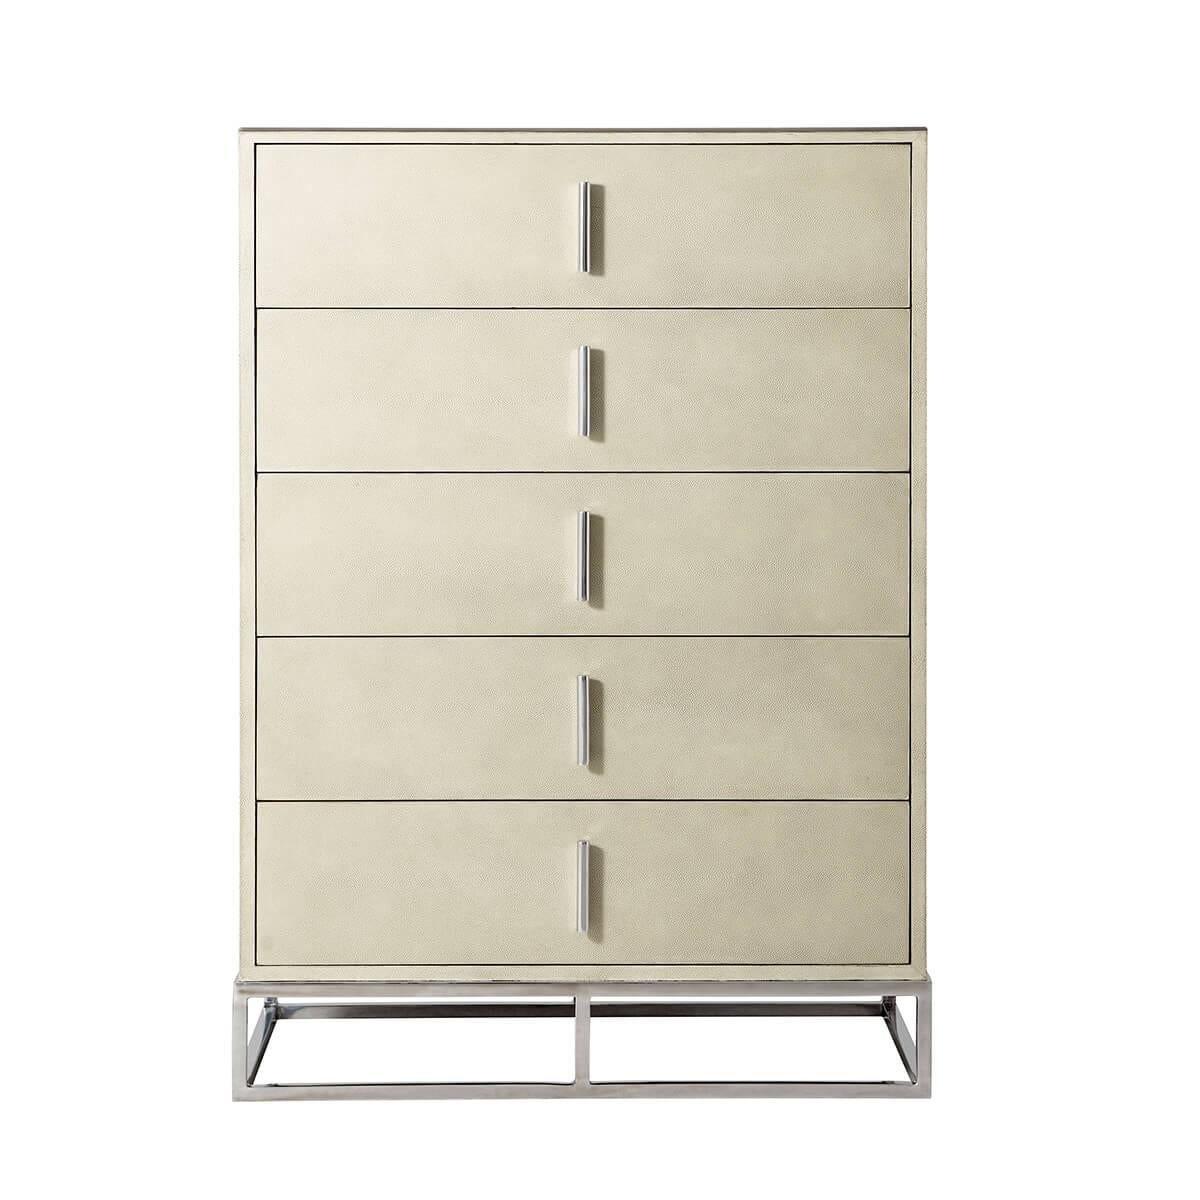 Wrapped in a shagreen embossed leather in our light overcast dove finish, with six long drawers and with polished nickel finish hardware and trim, all raised on a cube form polished nickel base.

Dimensions: 35.75